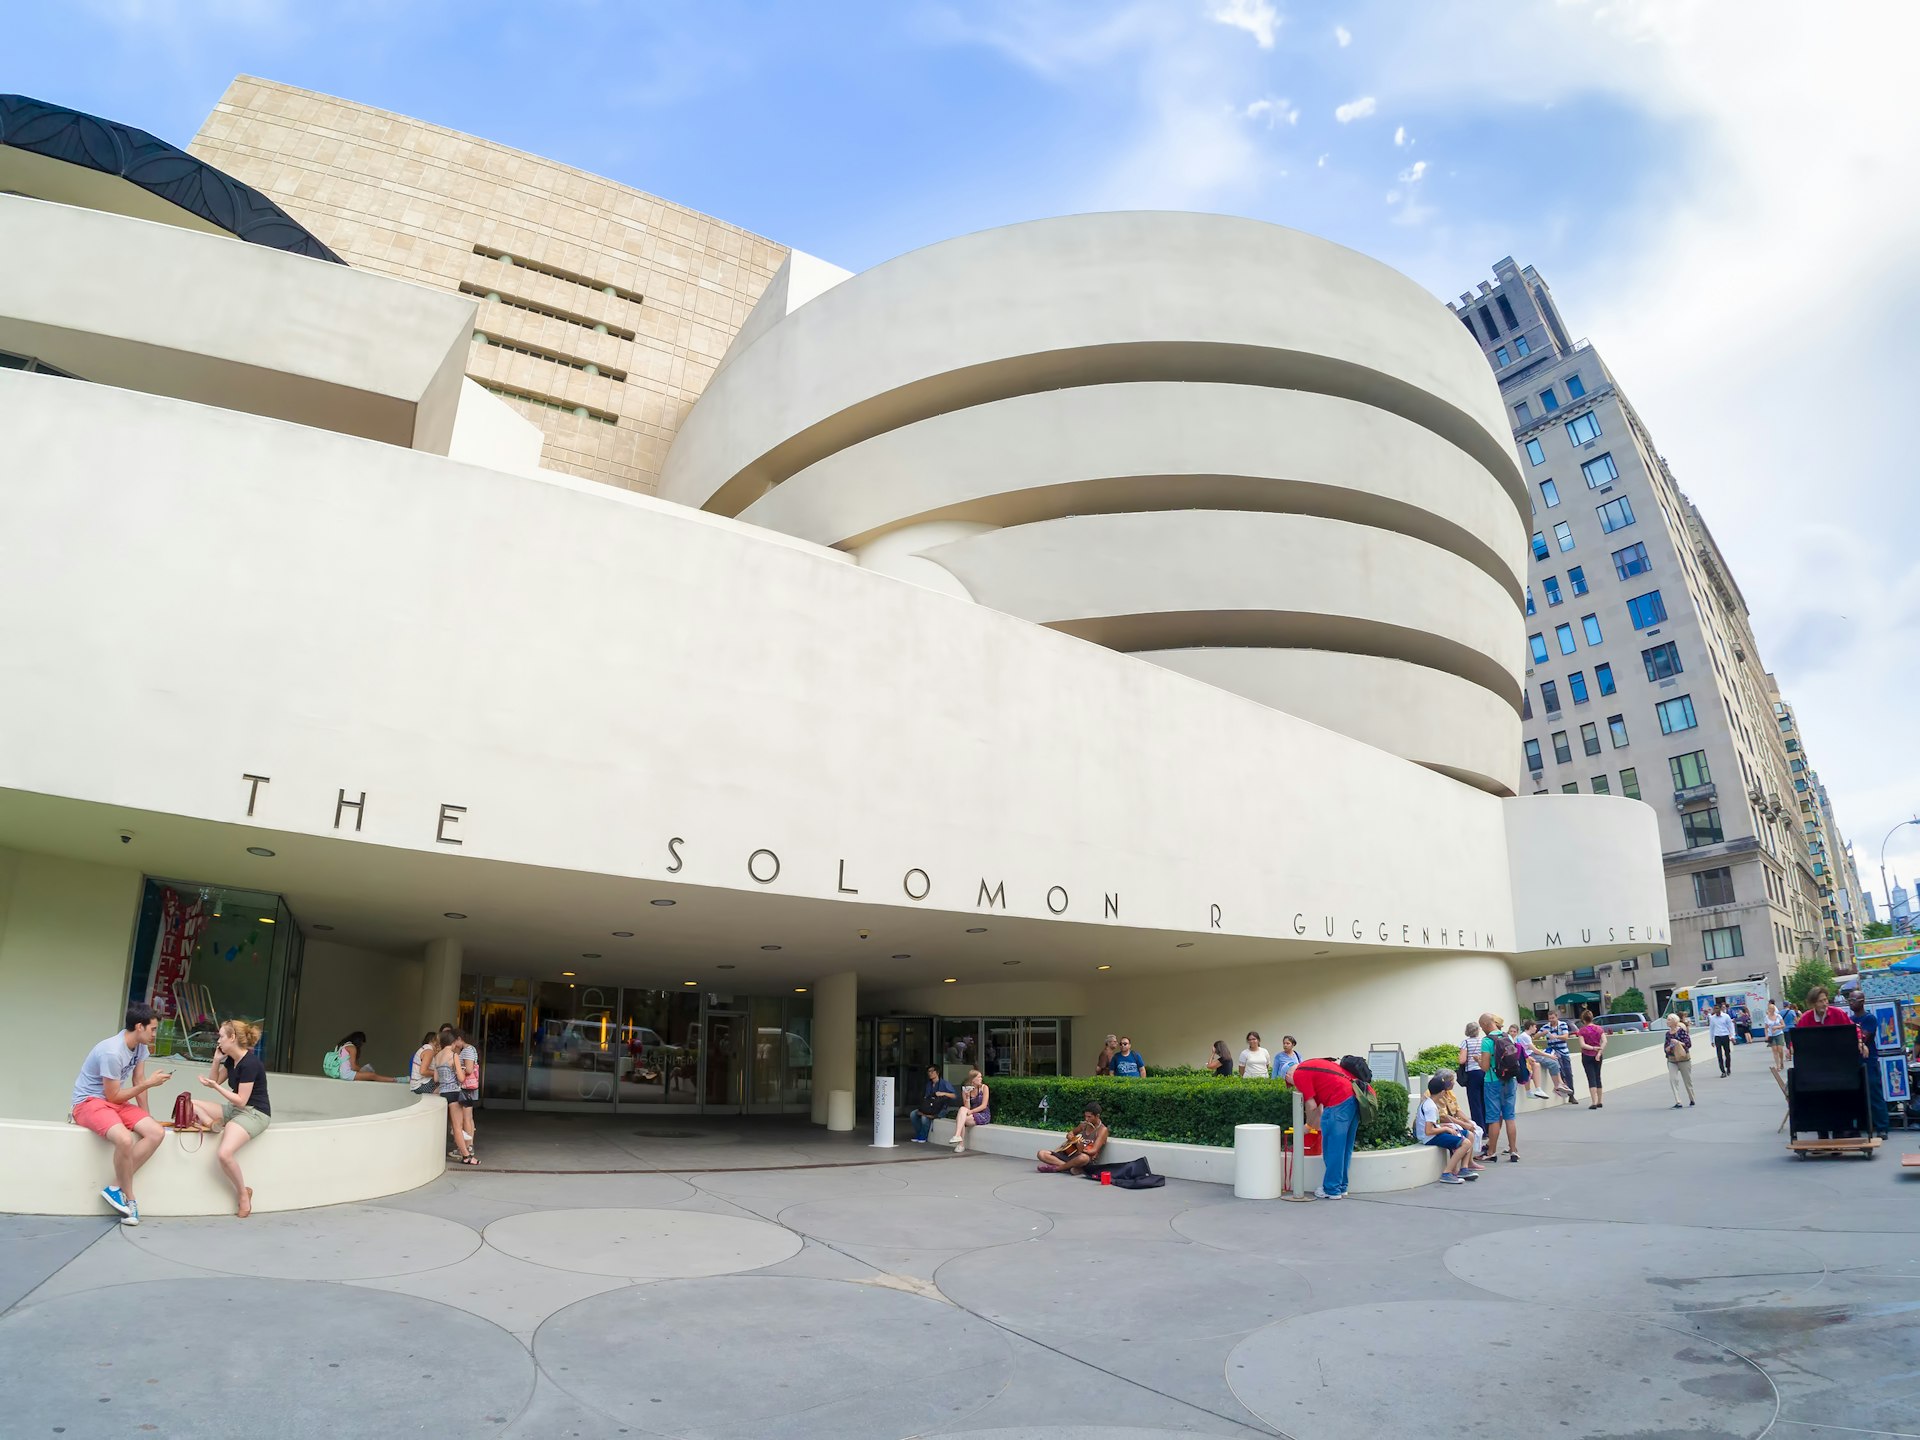 Groups of people sit on the stone ledges outside The Solomon R. Guggenheim Museum in New York City. 